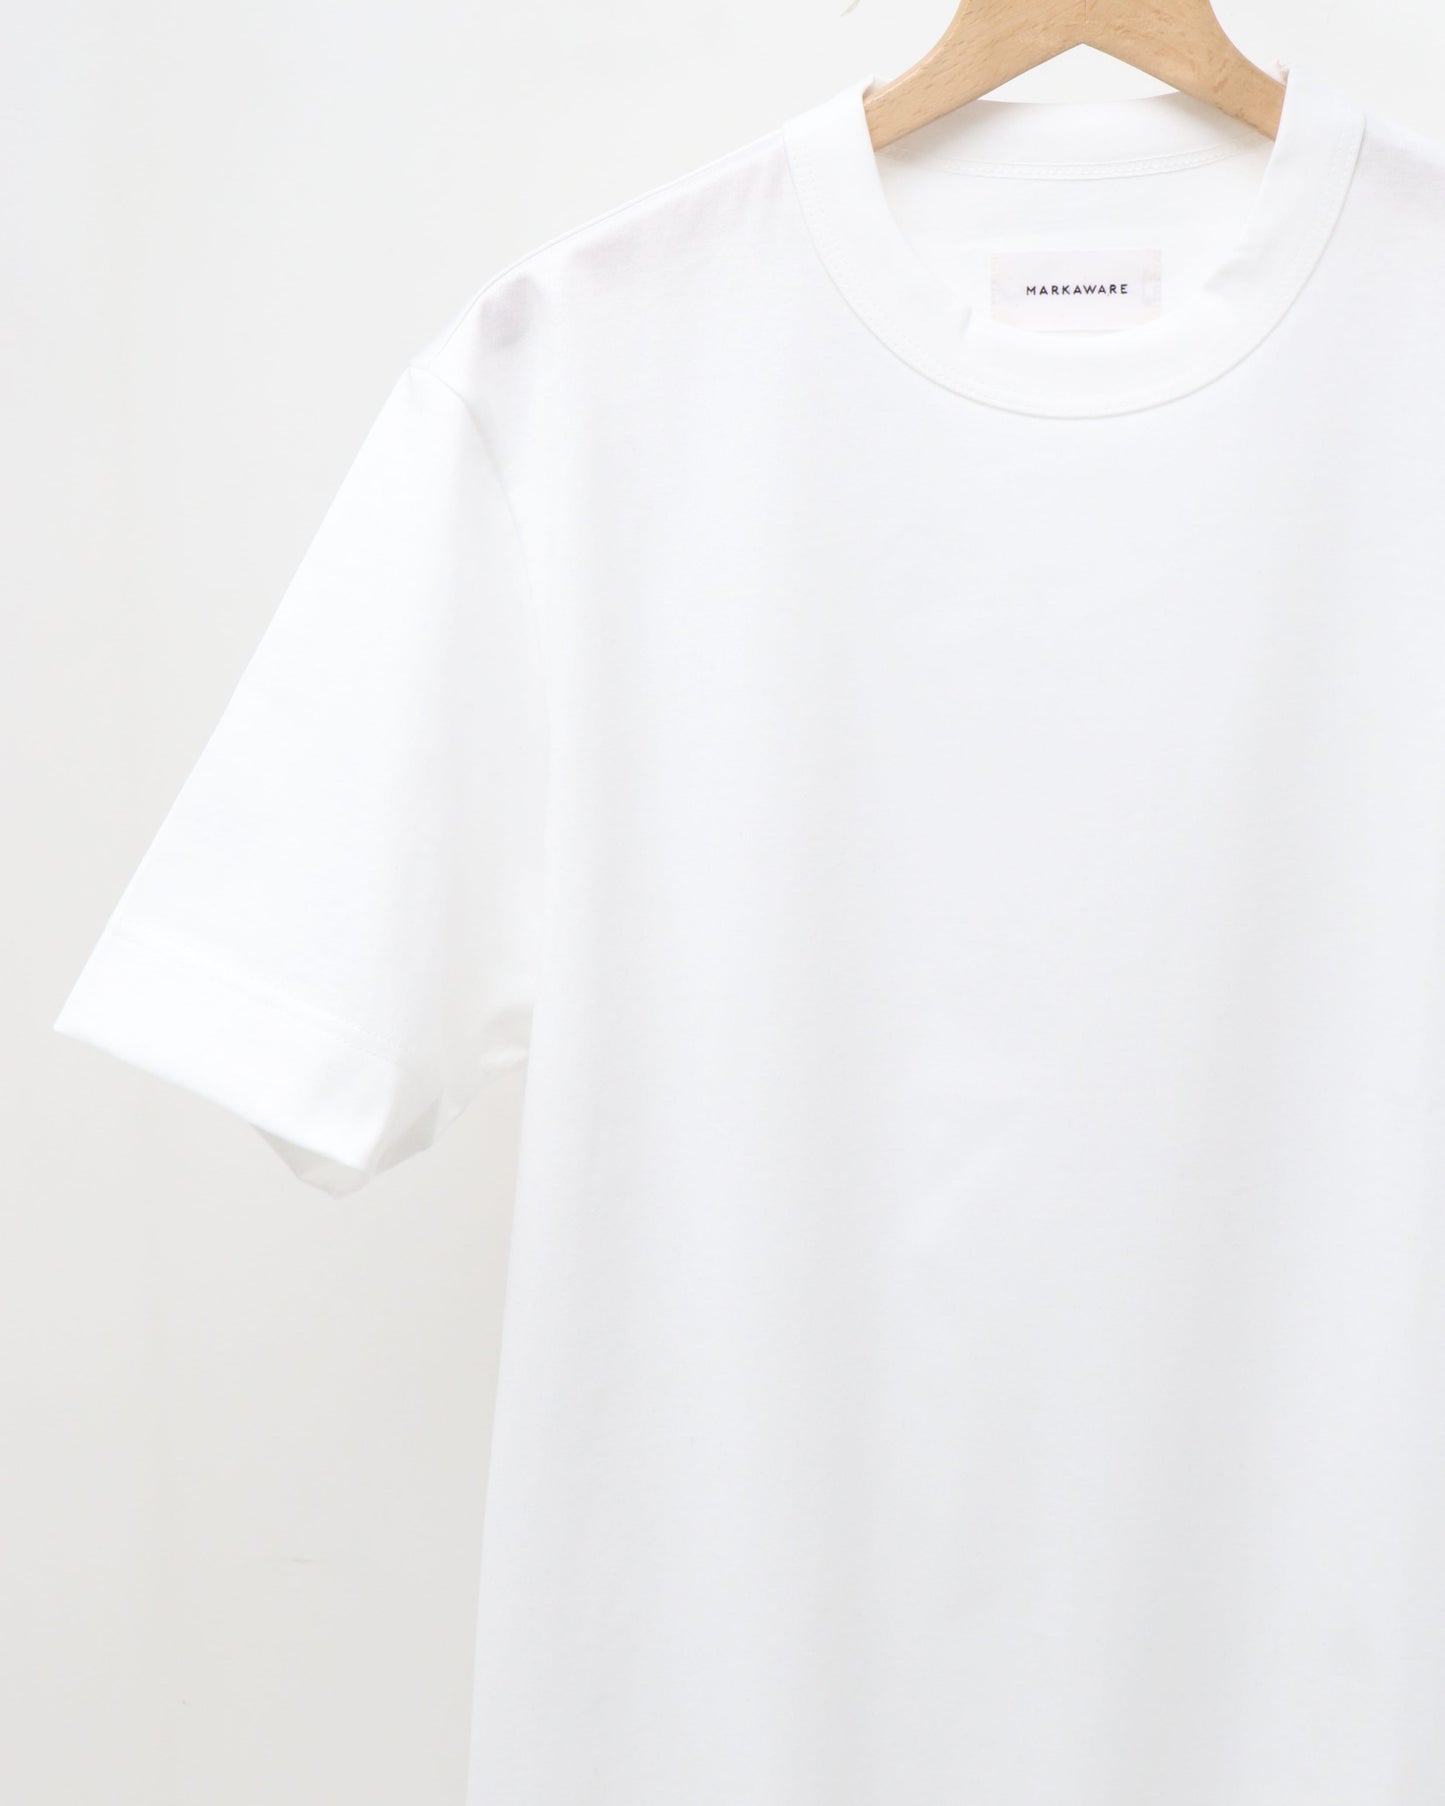 COMFORT-FIT Tee S/S WHITE